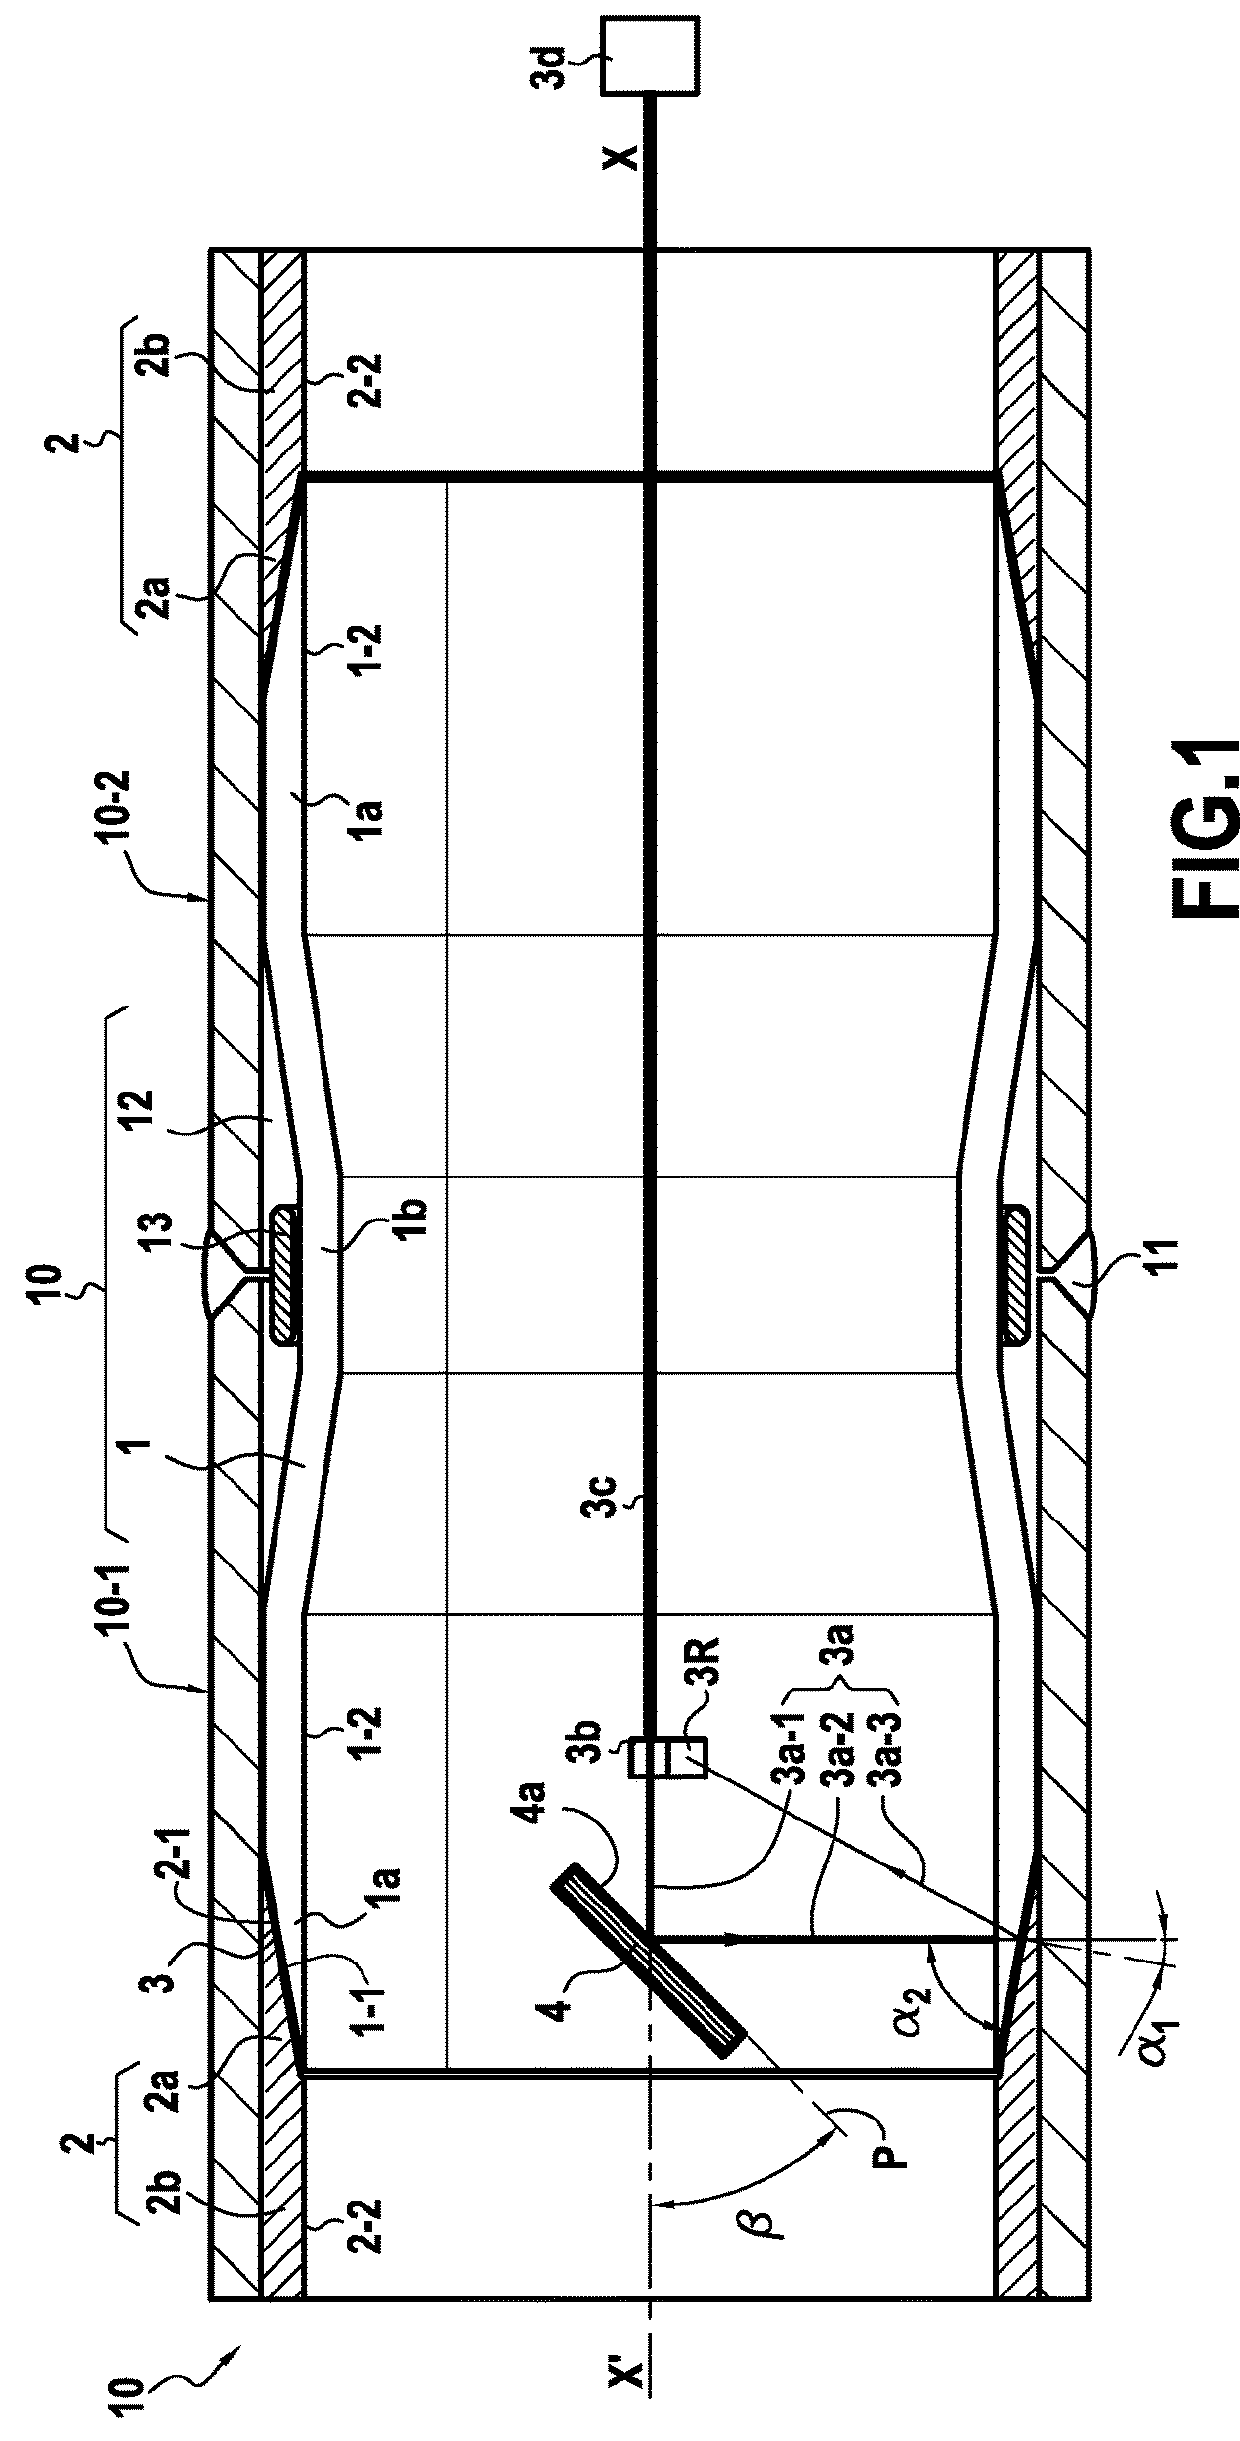 Method for Assembling Tubular Joining Sleeve and a Conduit Lining Tube by Laser Welding